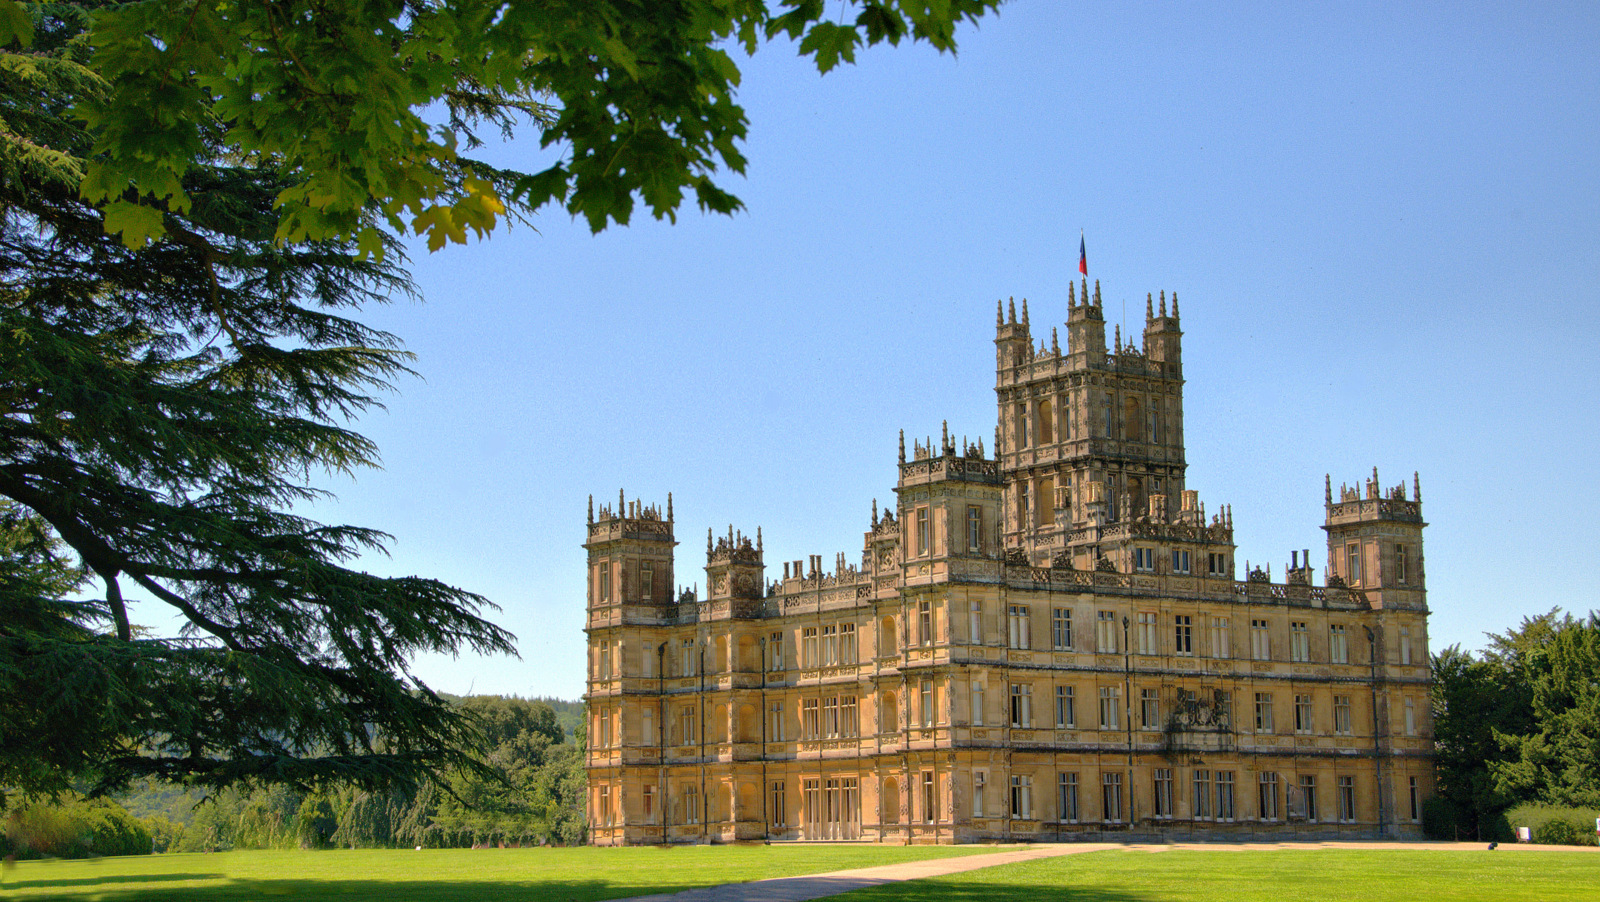 Highclere Castle - Downton Abbey - Wed 25th Aug 2021